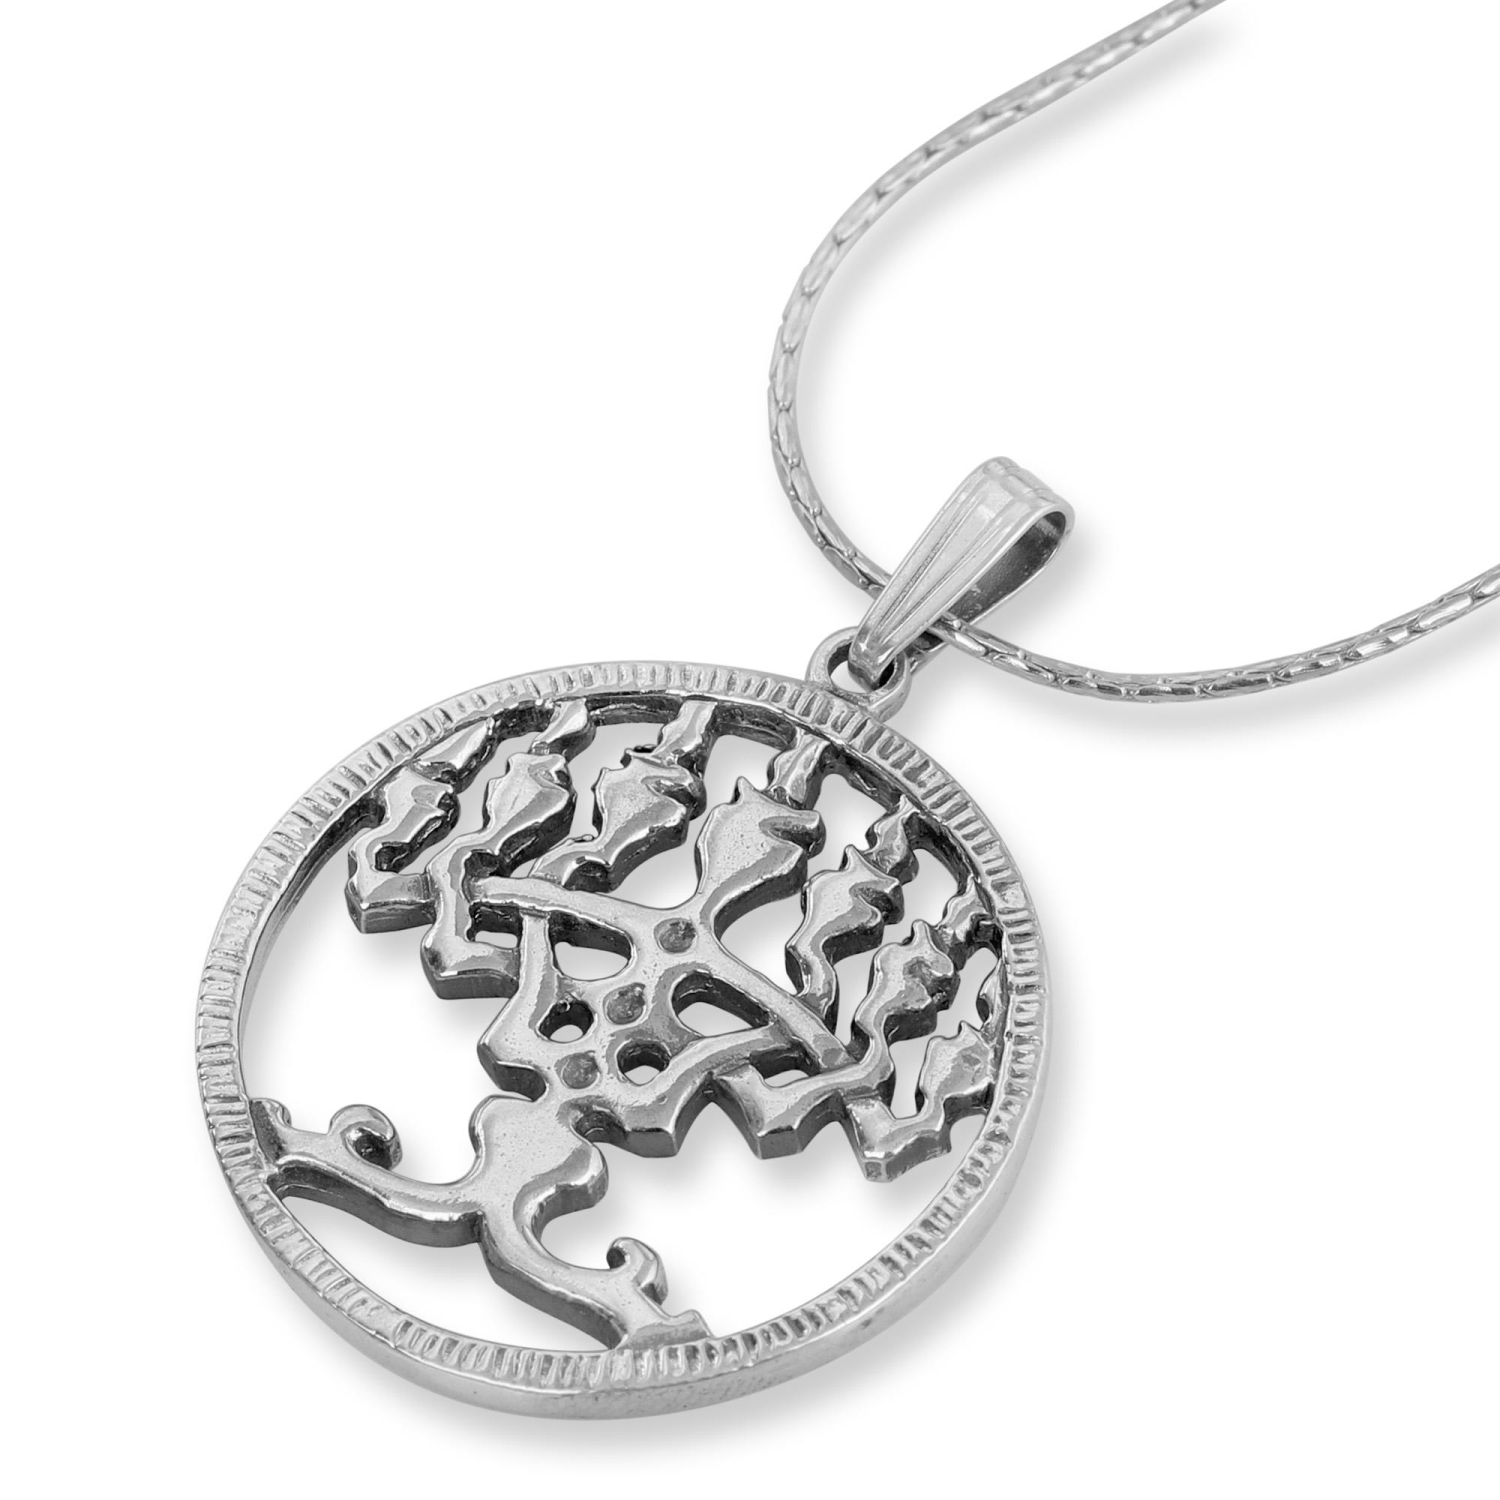 Sterling Silver Circular 7 Branched Menorah Necklace - 1